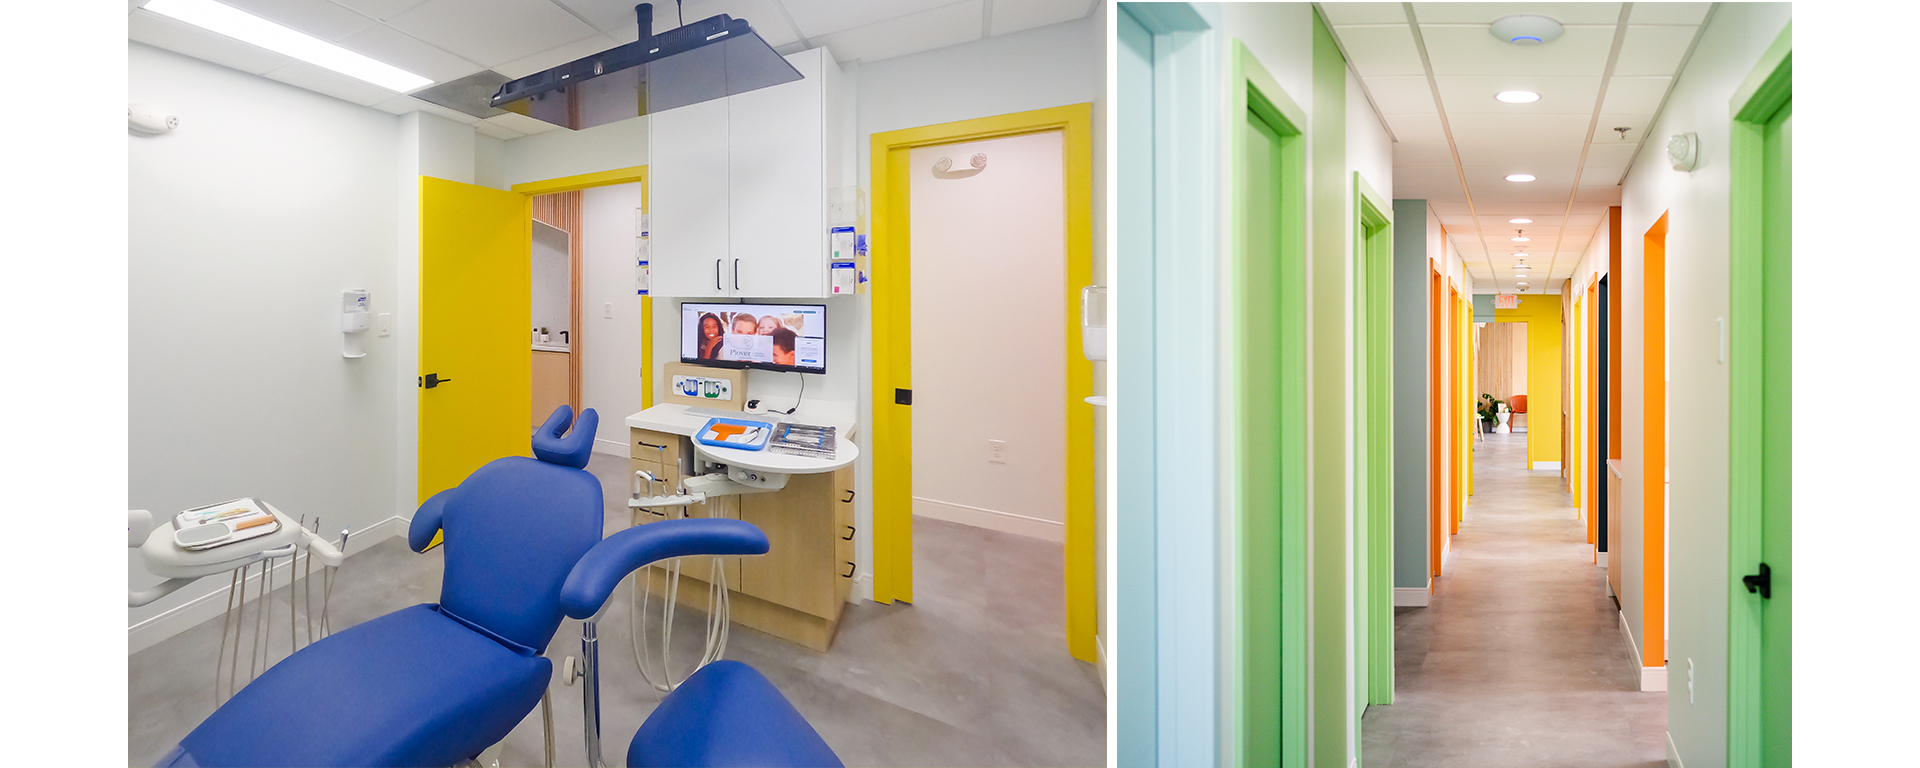 Interior of dental exam room and corridor with white walls and cheerfully bright multicolored doors and trim.